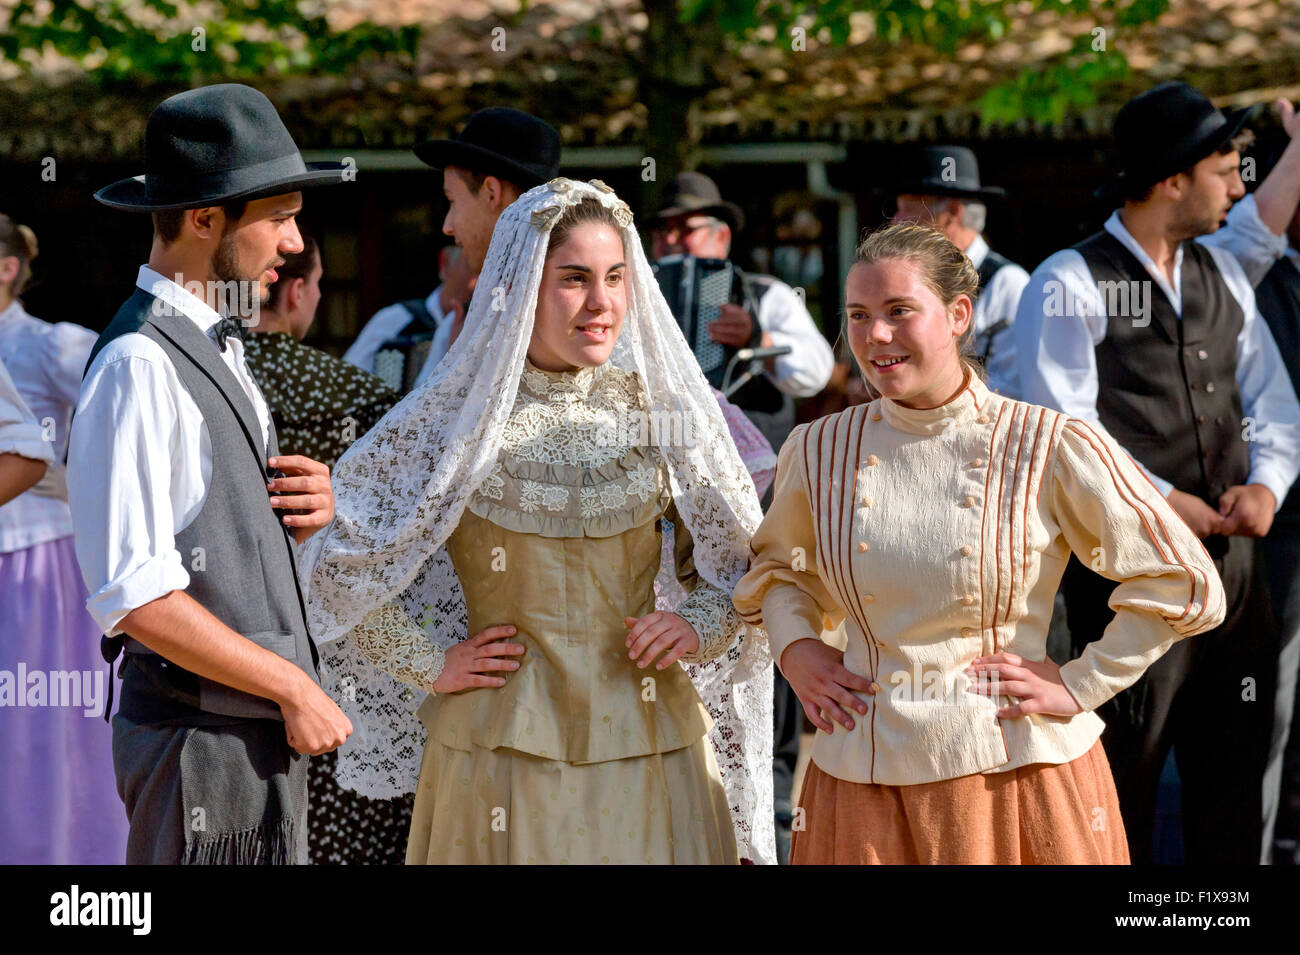 members of a folkdancing troupe in traditional regional Algarve costumes at Alte, Algarve, Portugal Stock Photo